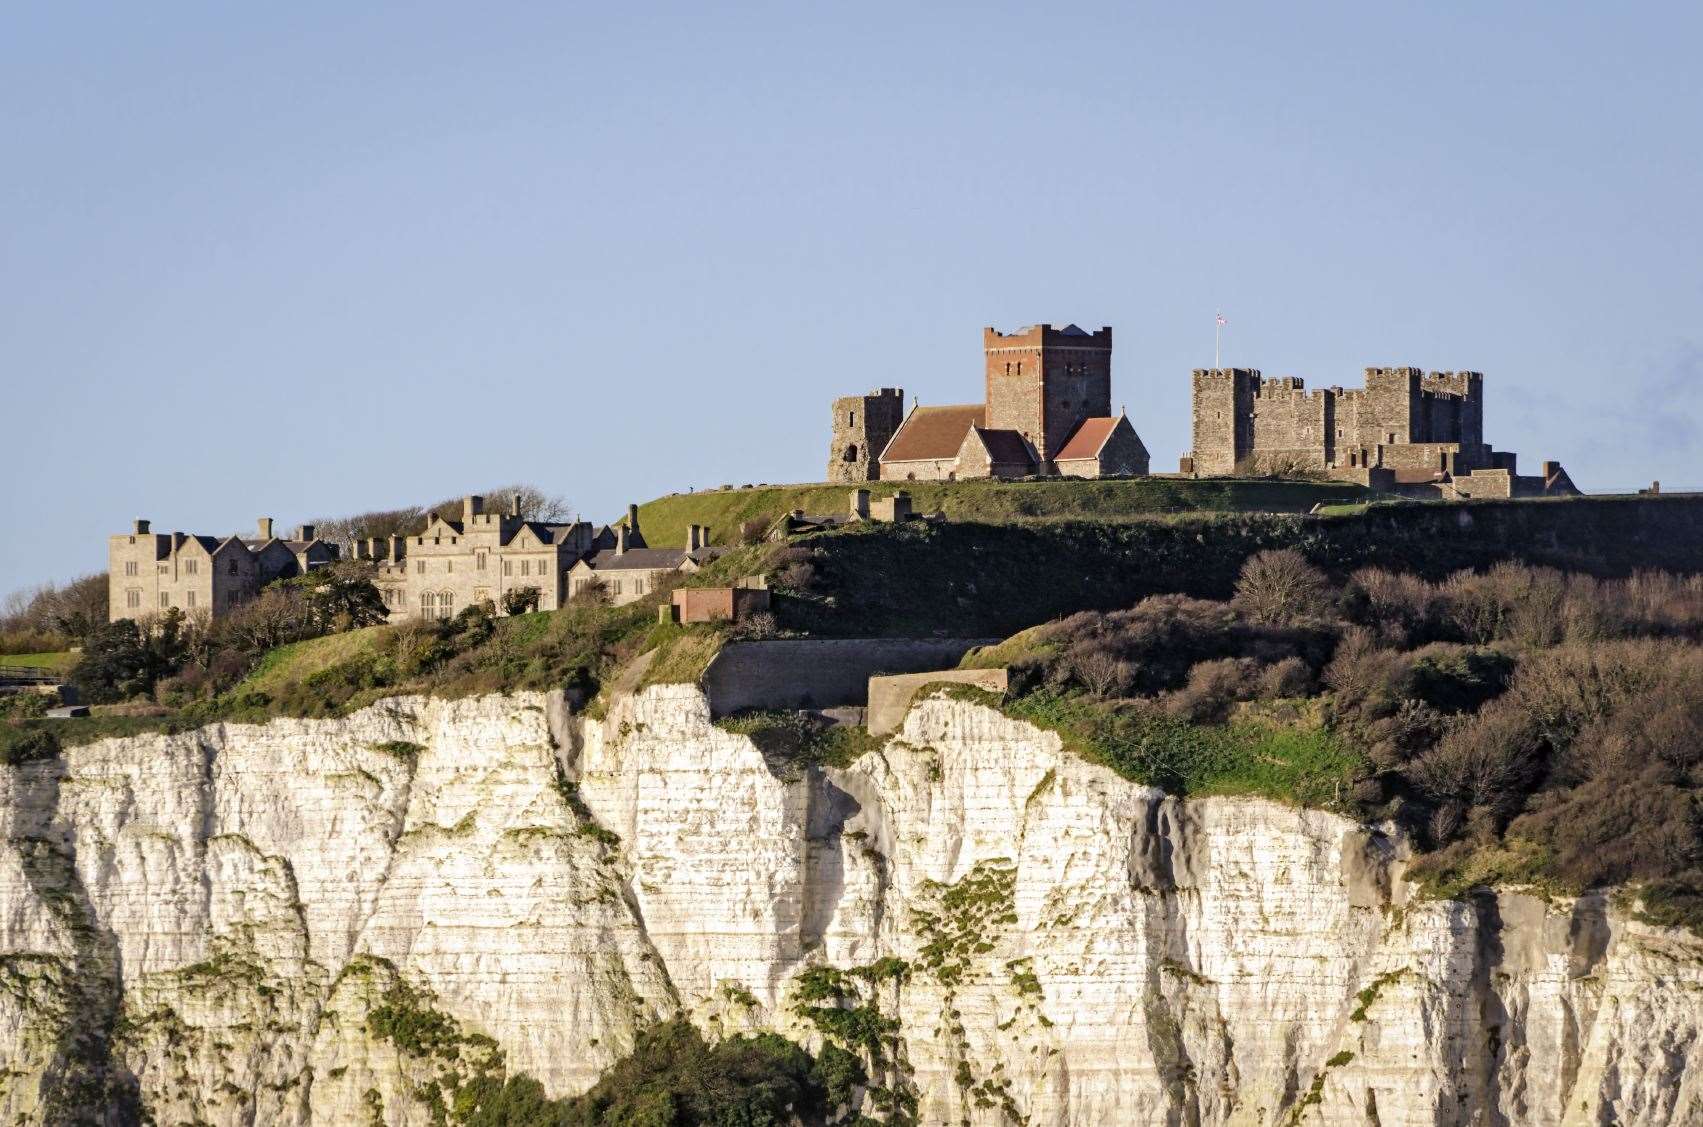 Eleanor Cobham and Duke Humphrey lived in Dover Castle before Eleanor was put on trial for witchcraft